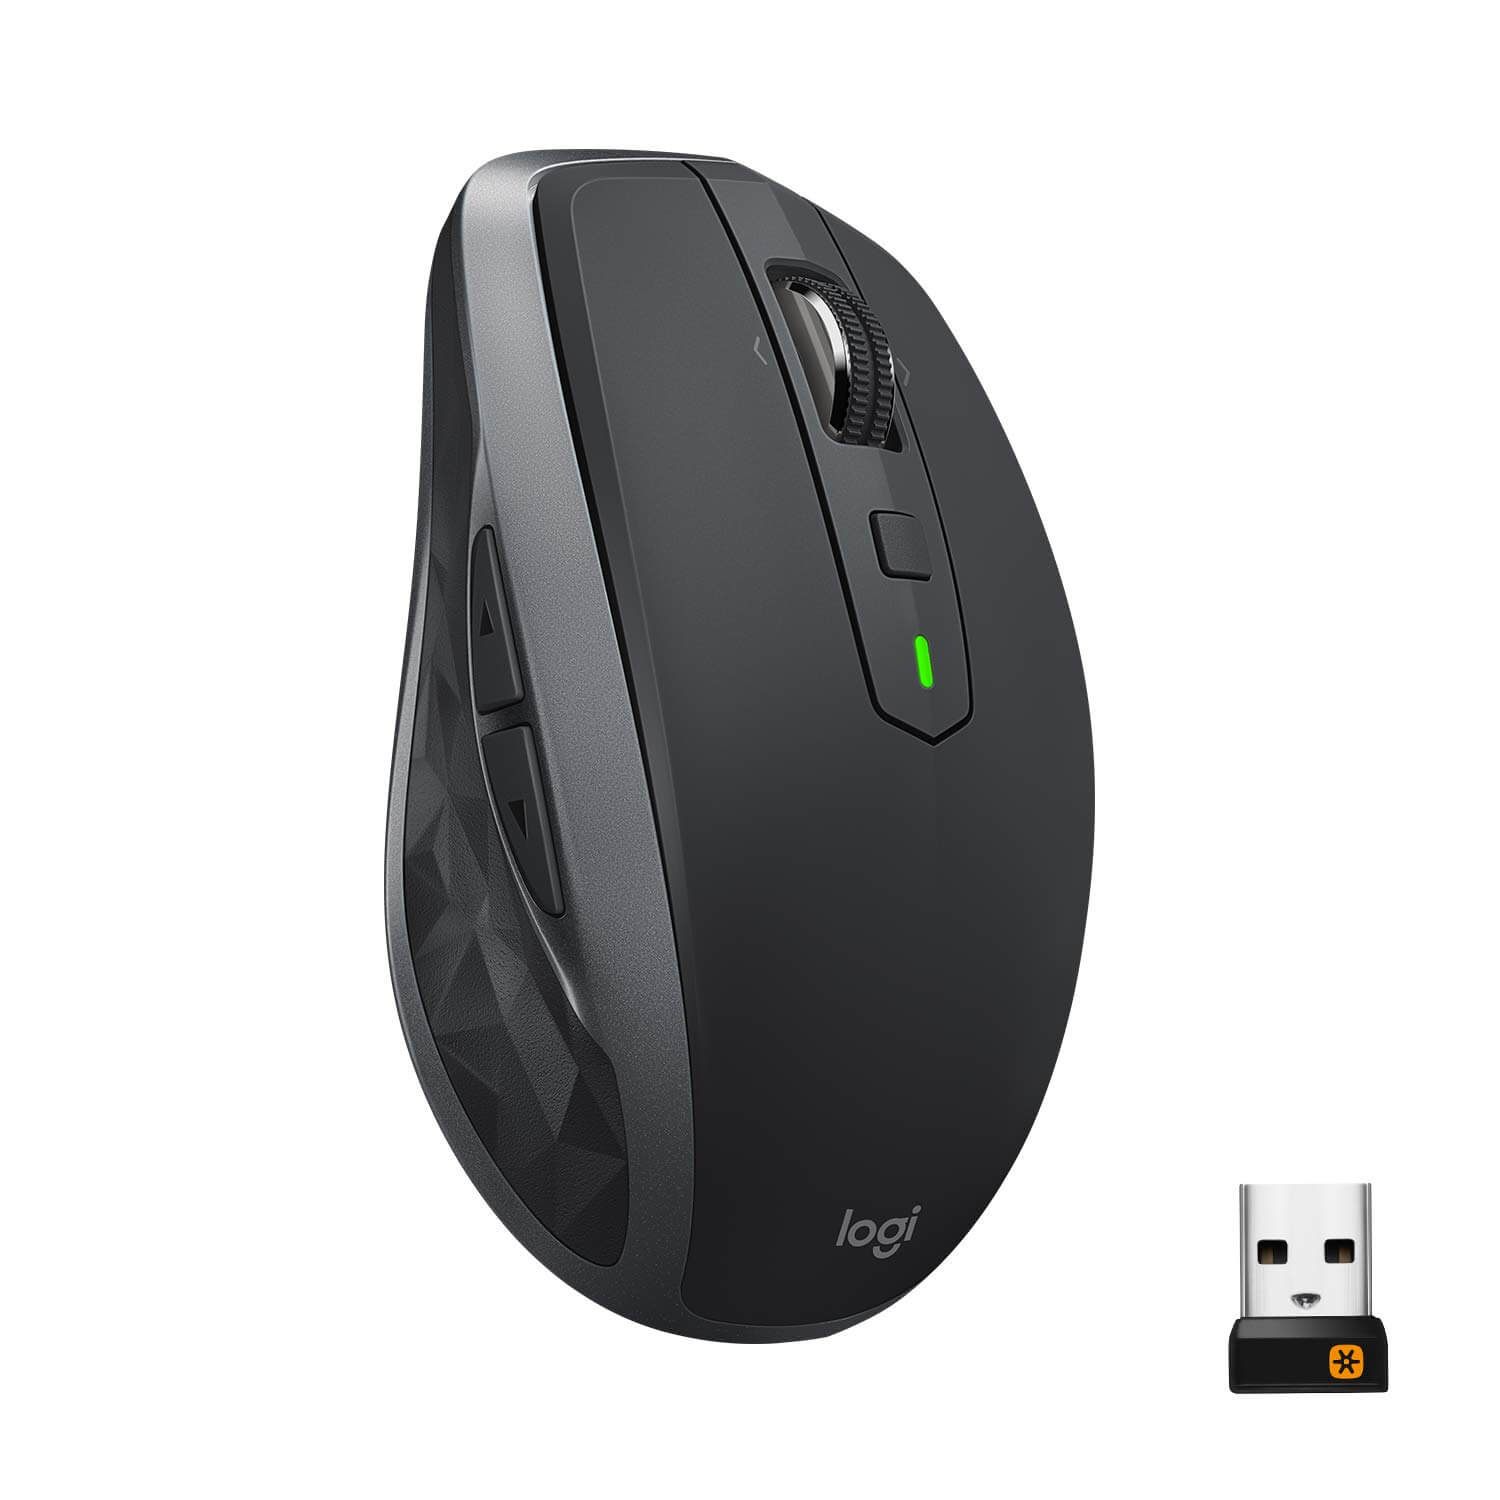 Plaske Lige chokerende Logitech MX Anywhere 2 Vs Anywhere 2S: Difference and Detailed Review